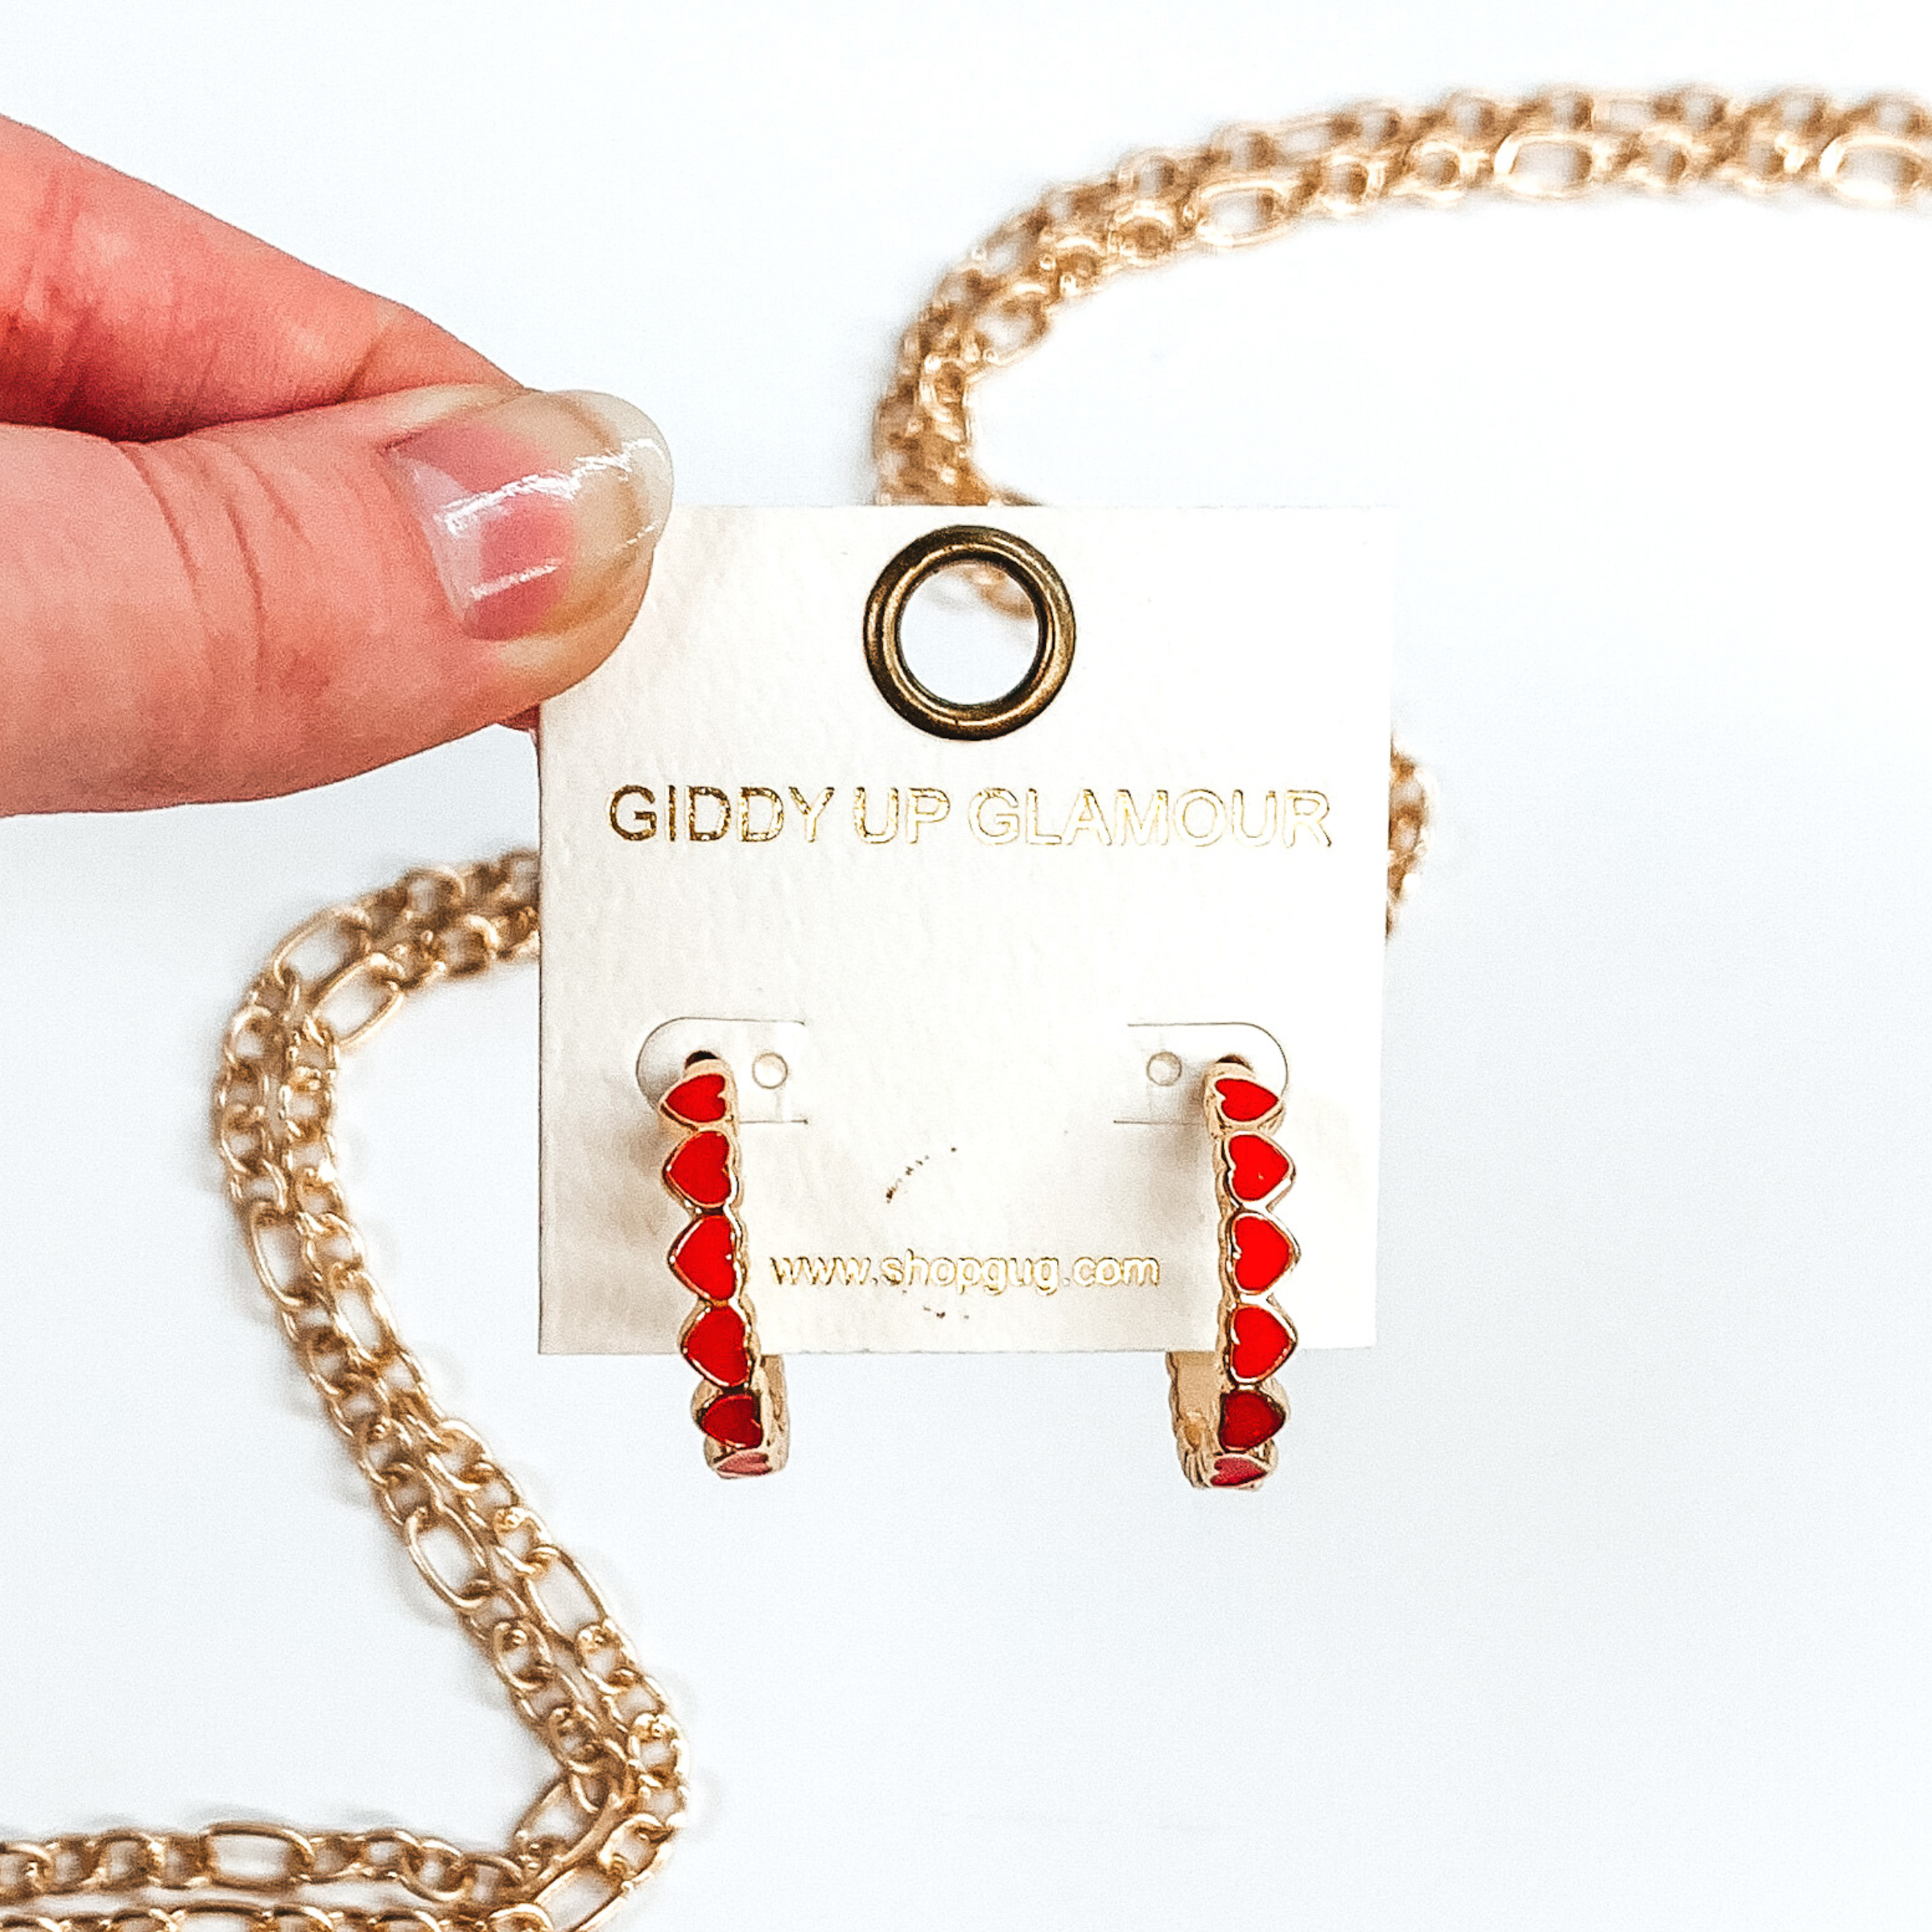 Gold outlined, red hearts that are connected to each other to form hoop earrings. These hoops are pictured on a white earring holder held by fingers on a white background with gold chains in the background.